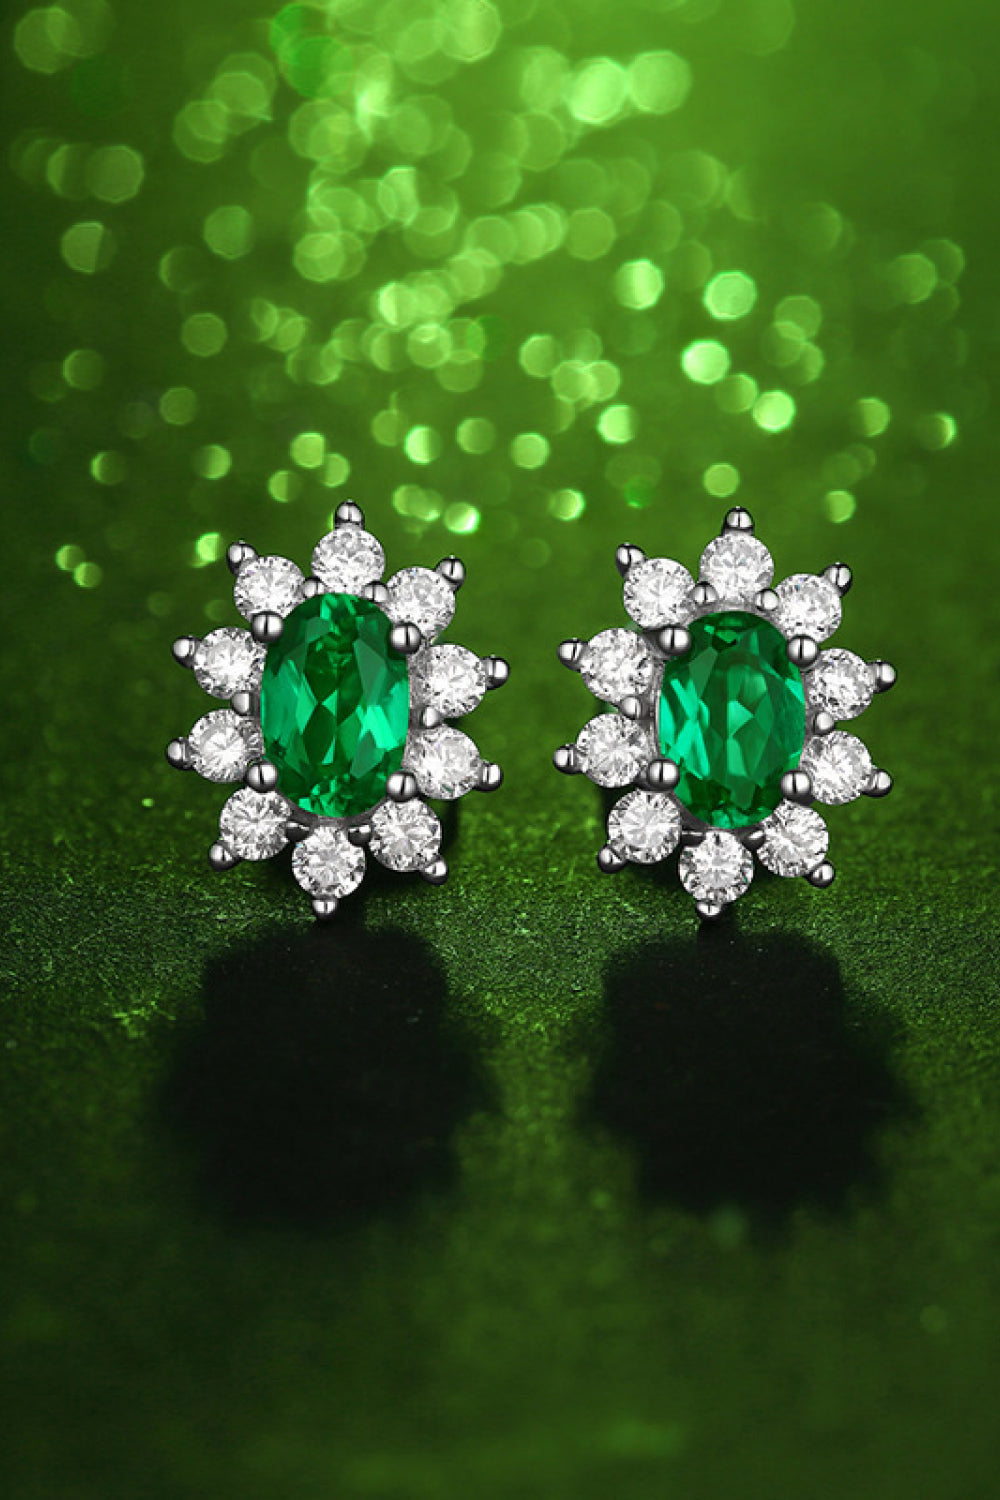 Lab grown 1ct emerald stud earrings with diamond accents.